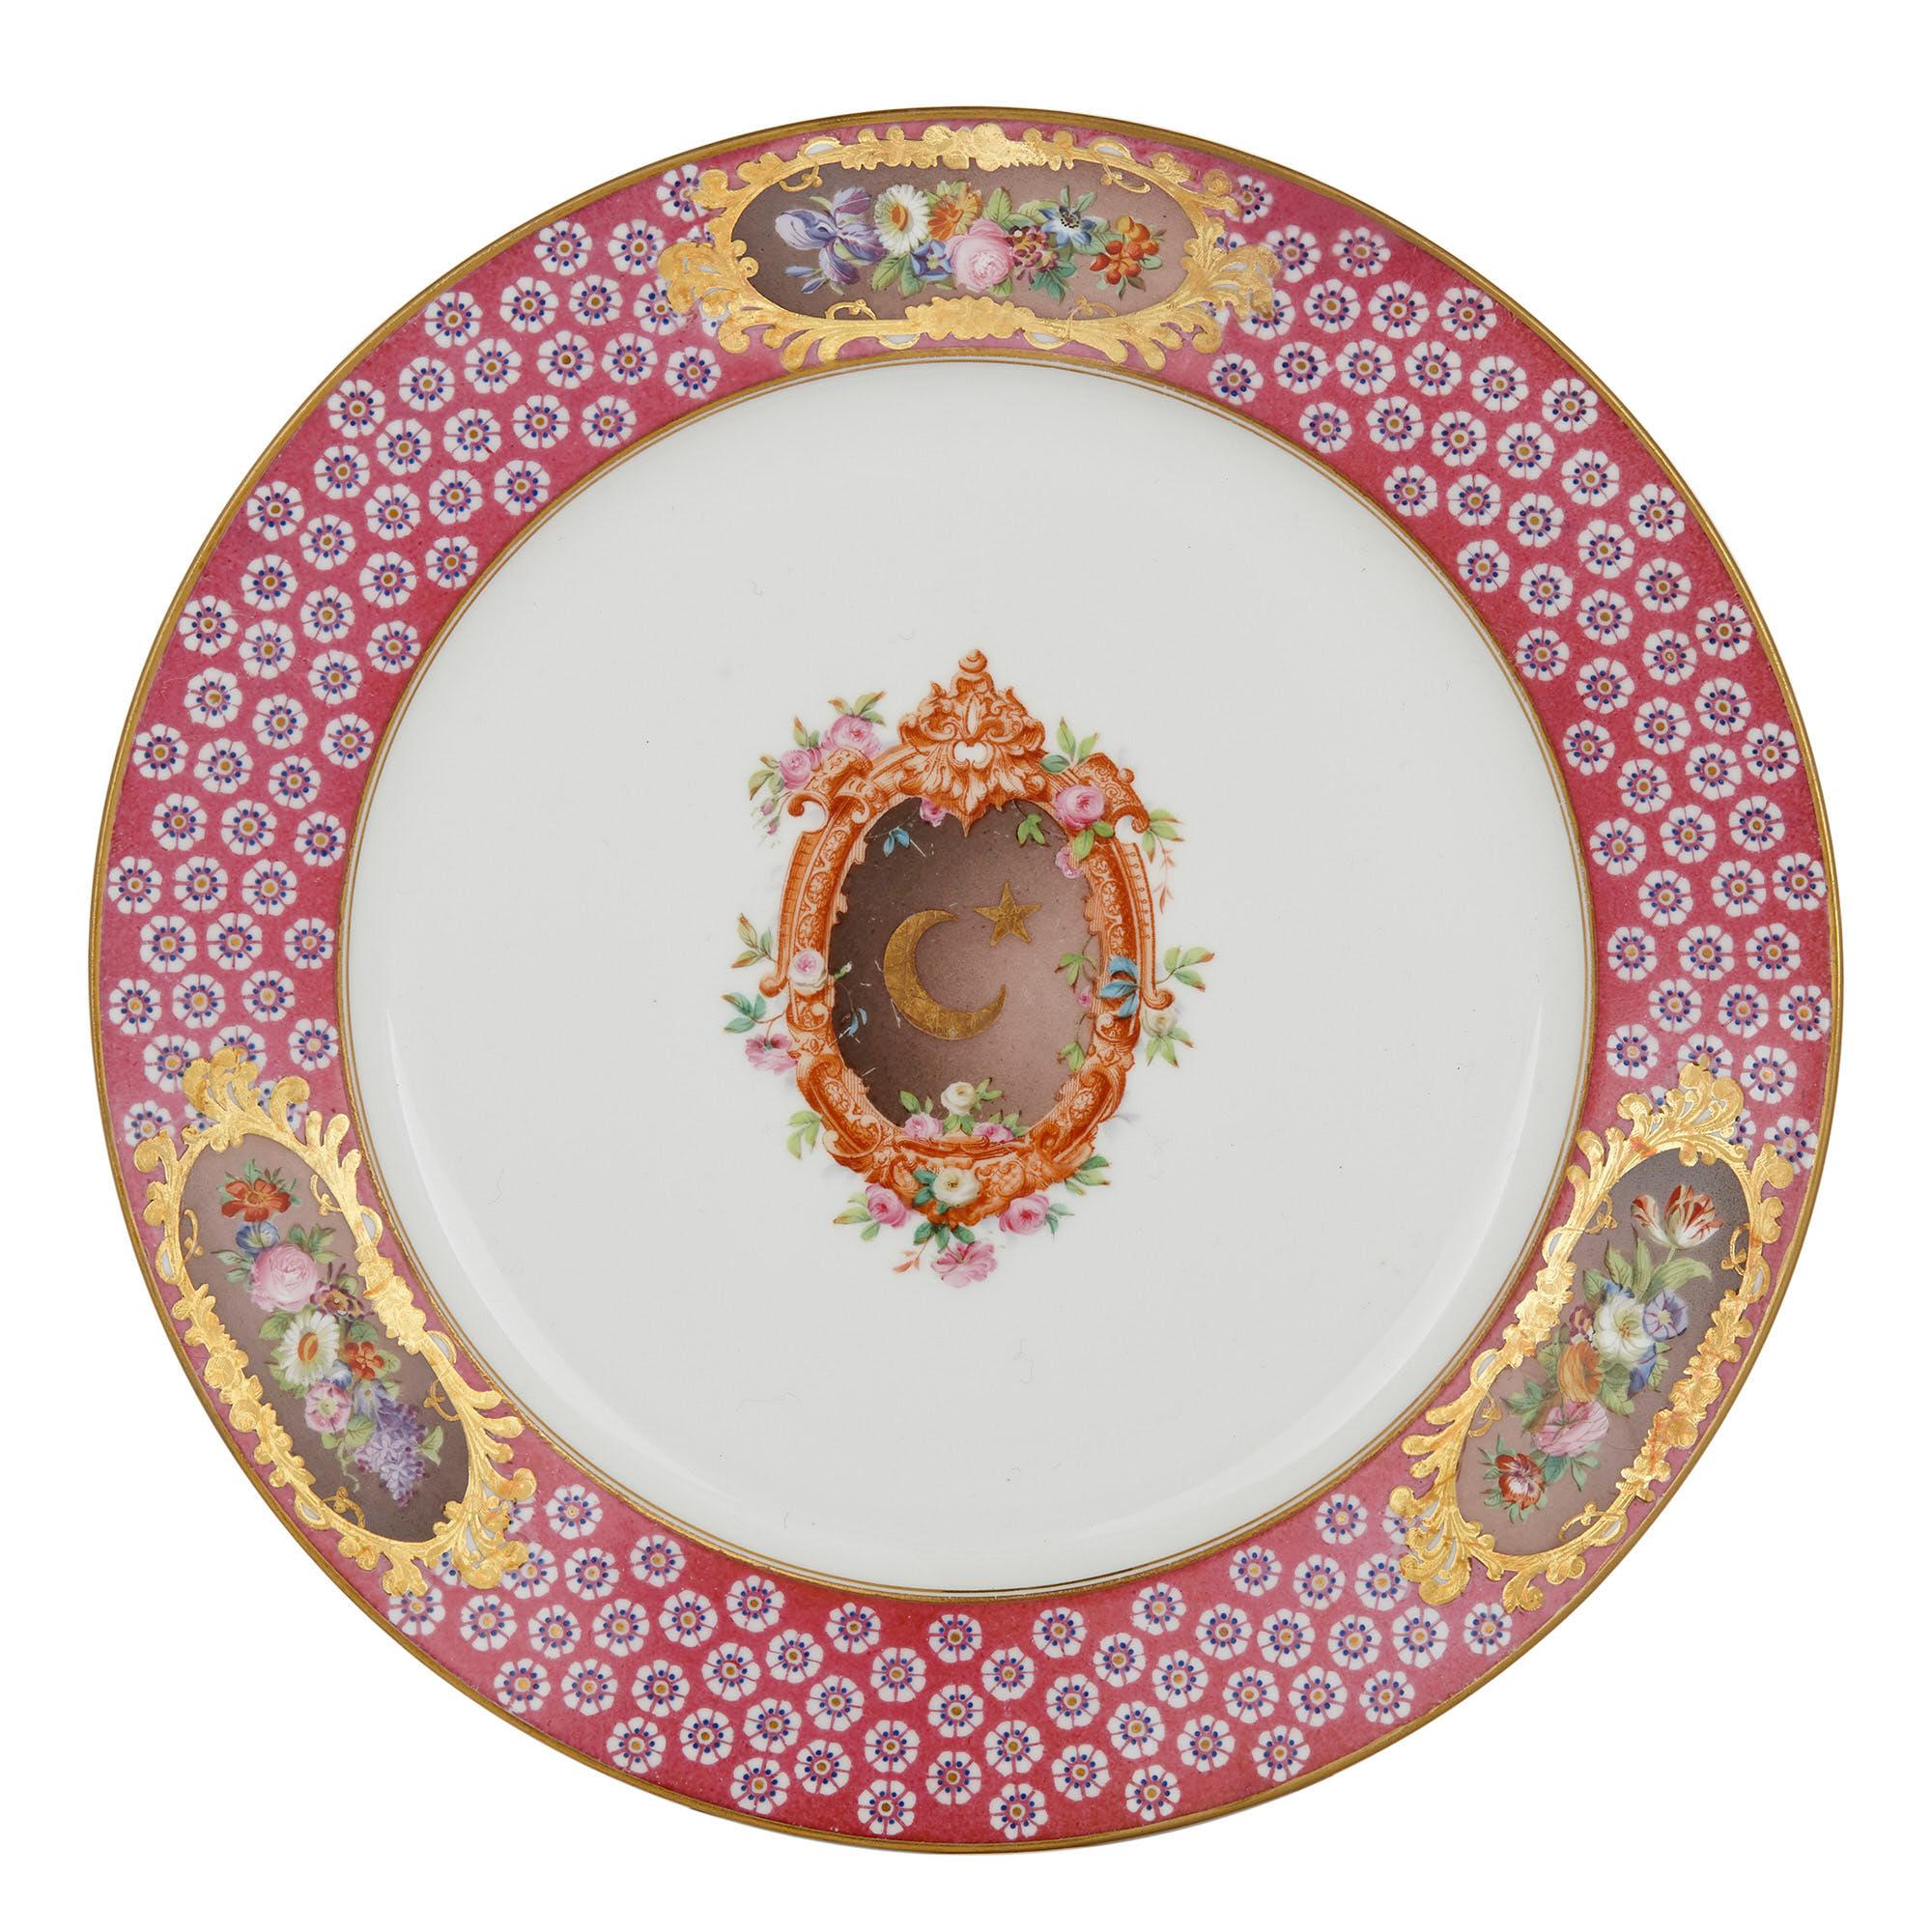 Each Sèvres plate in this set of three features a central cartouche and a red-banded rim, all set above the white ground of the porcelain. The central scrolled and foliate cartouche contains the star and crescent symbol—indicating something of the